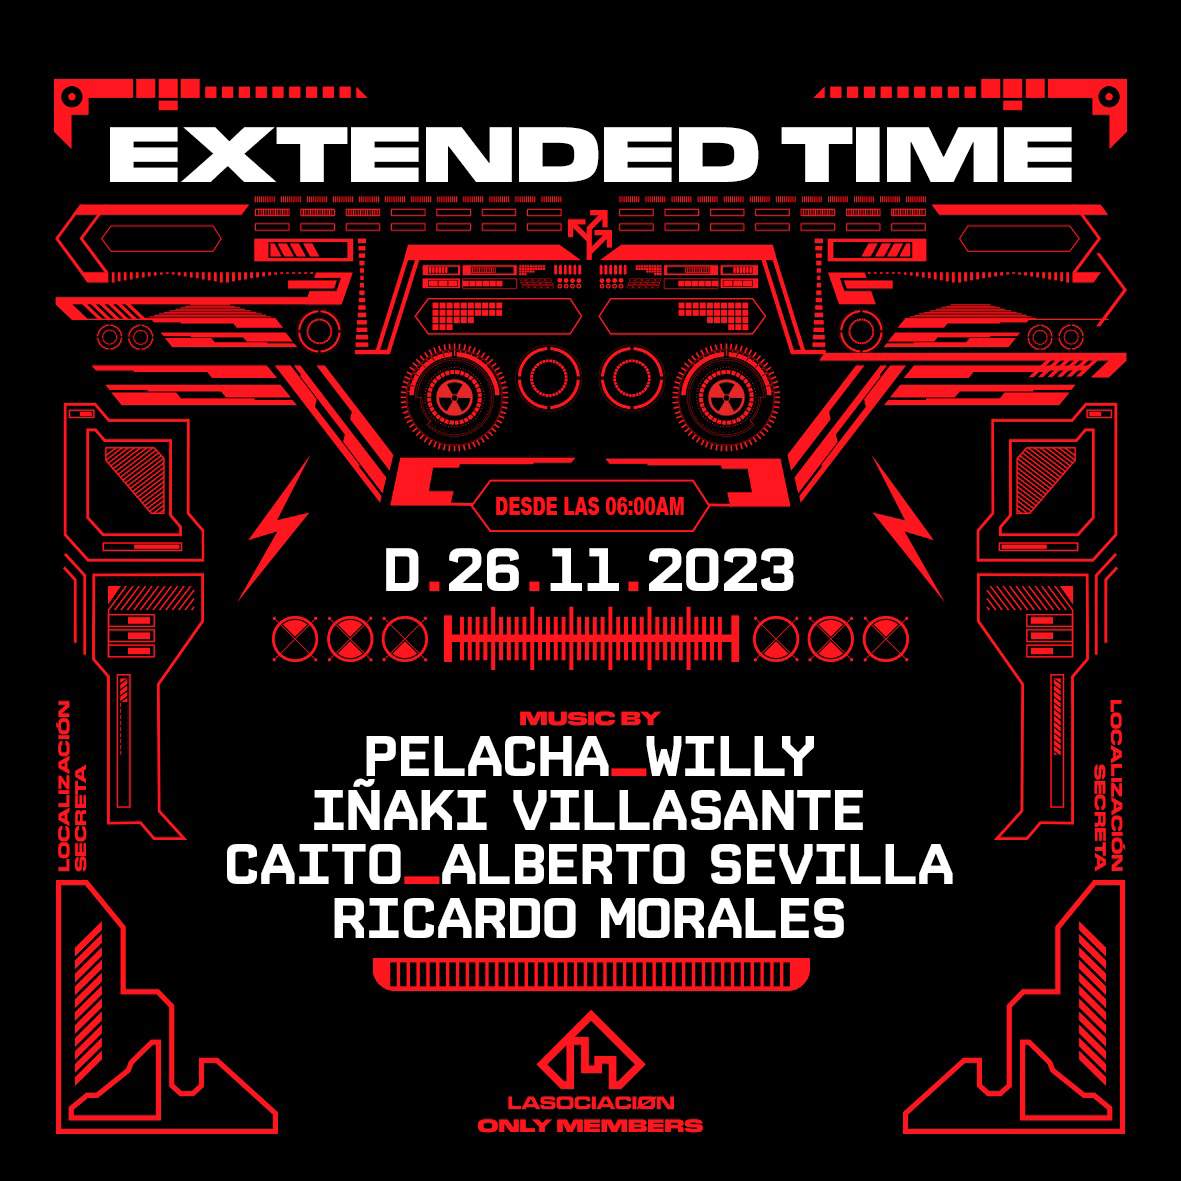 EXTENDED TIME - Página frontal